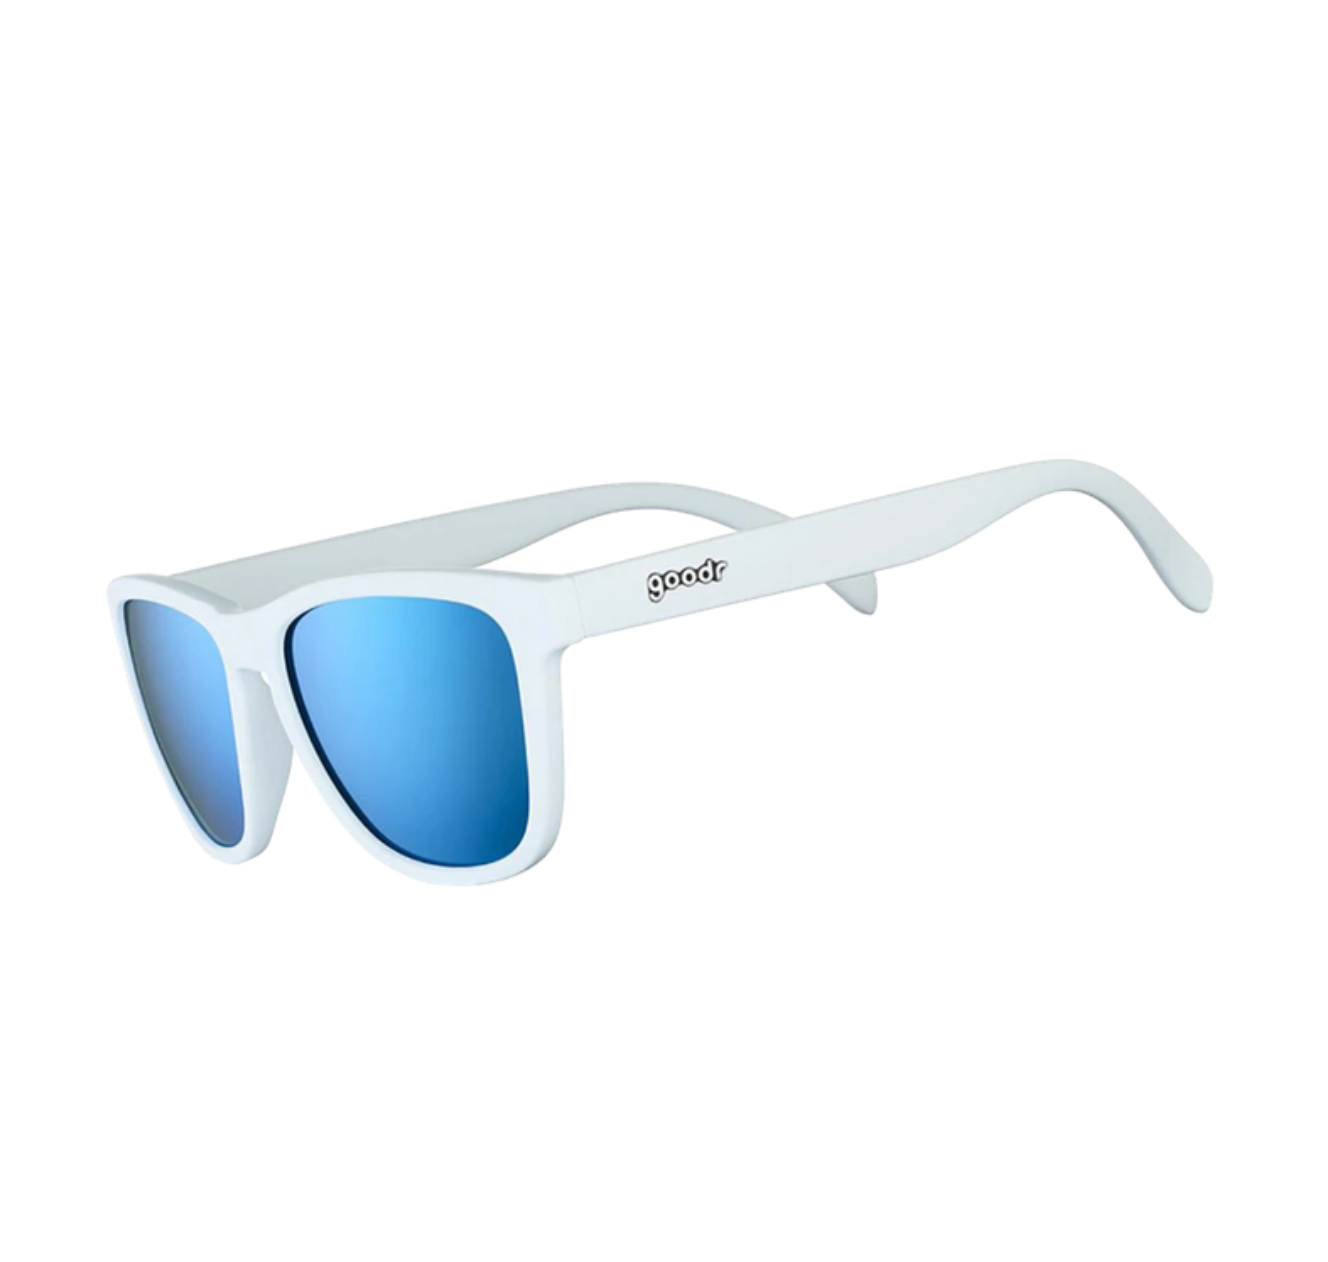 Iced By Yetis Sunglasses